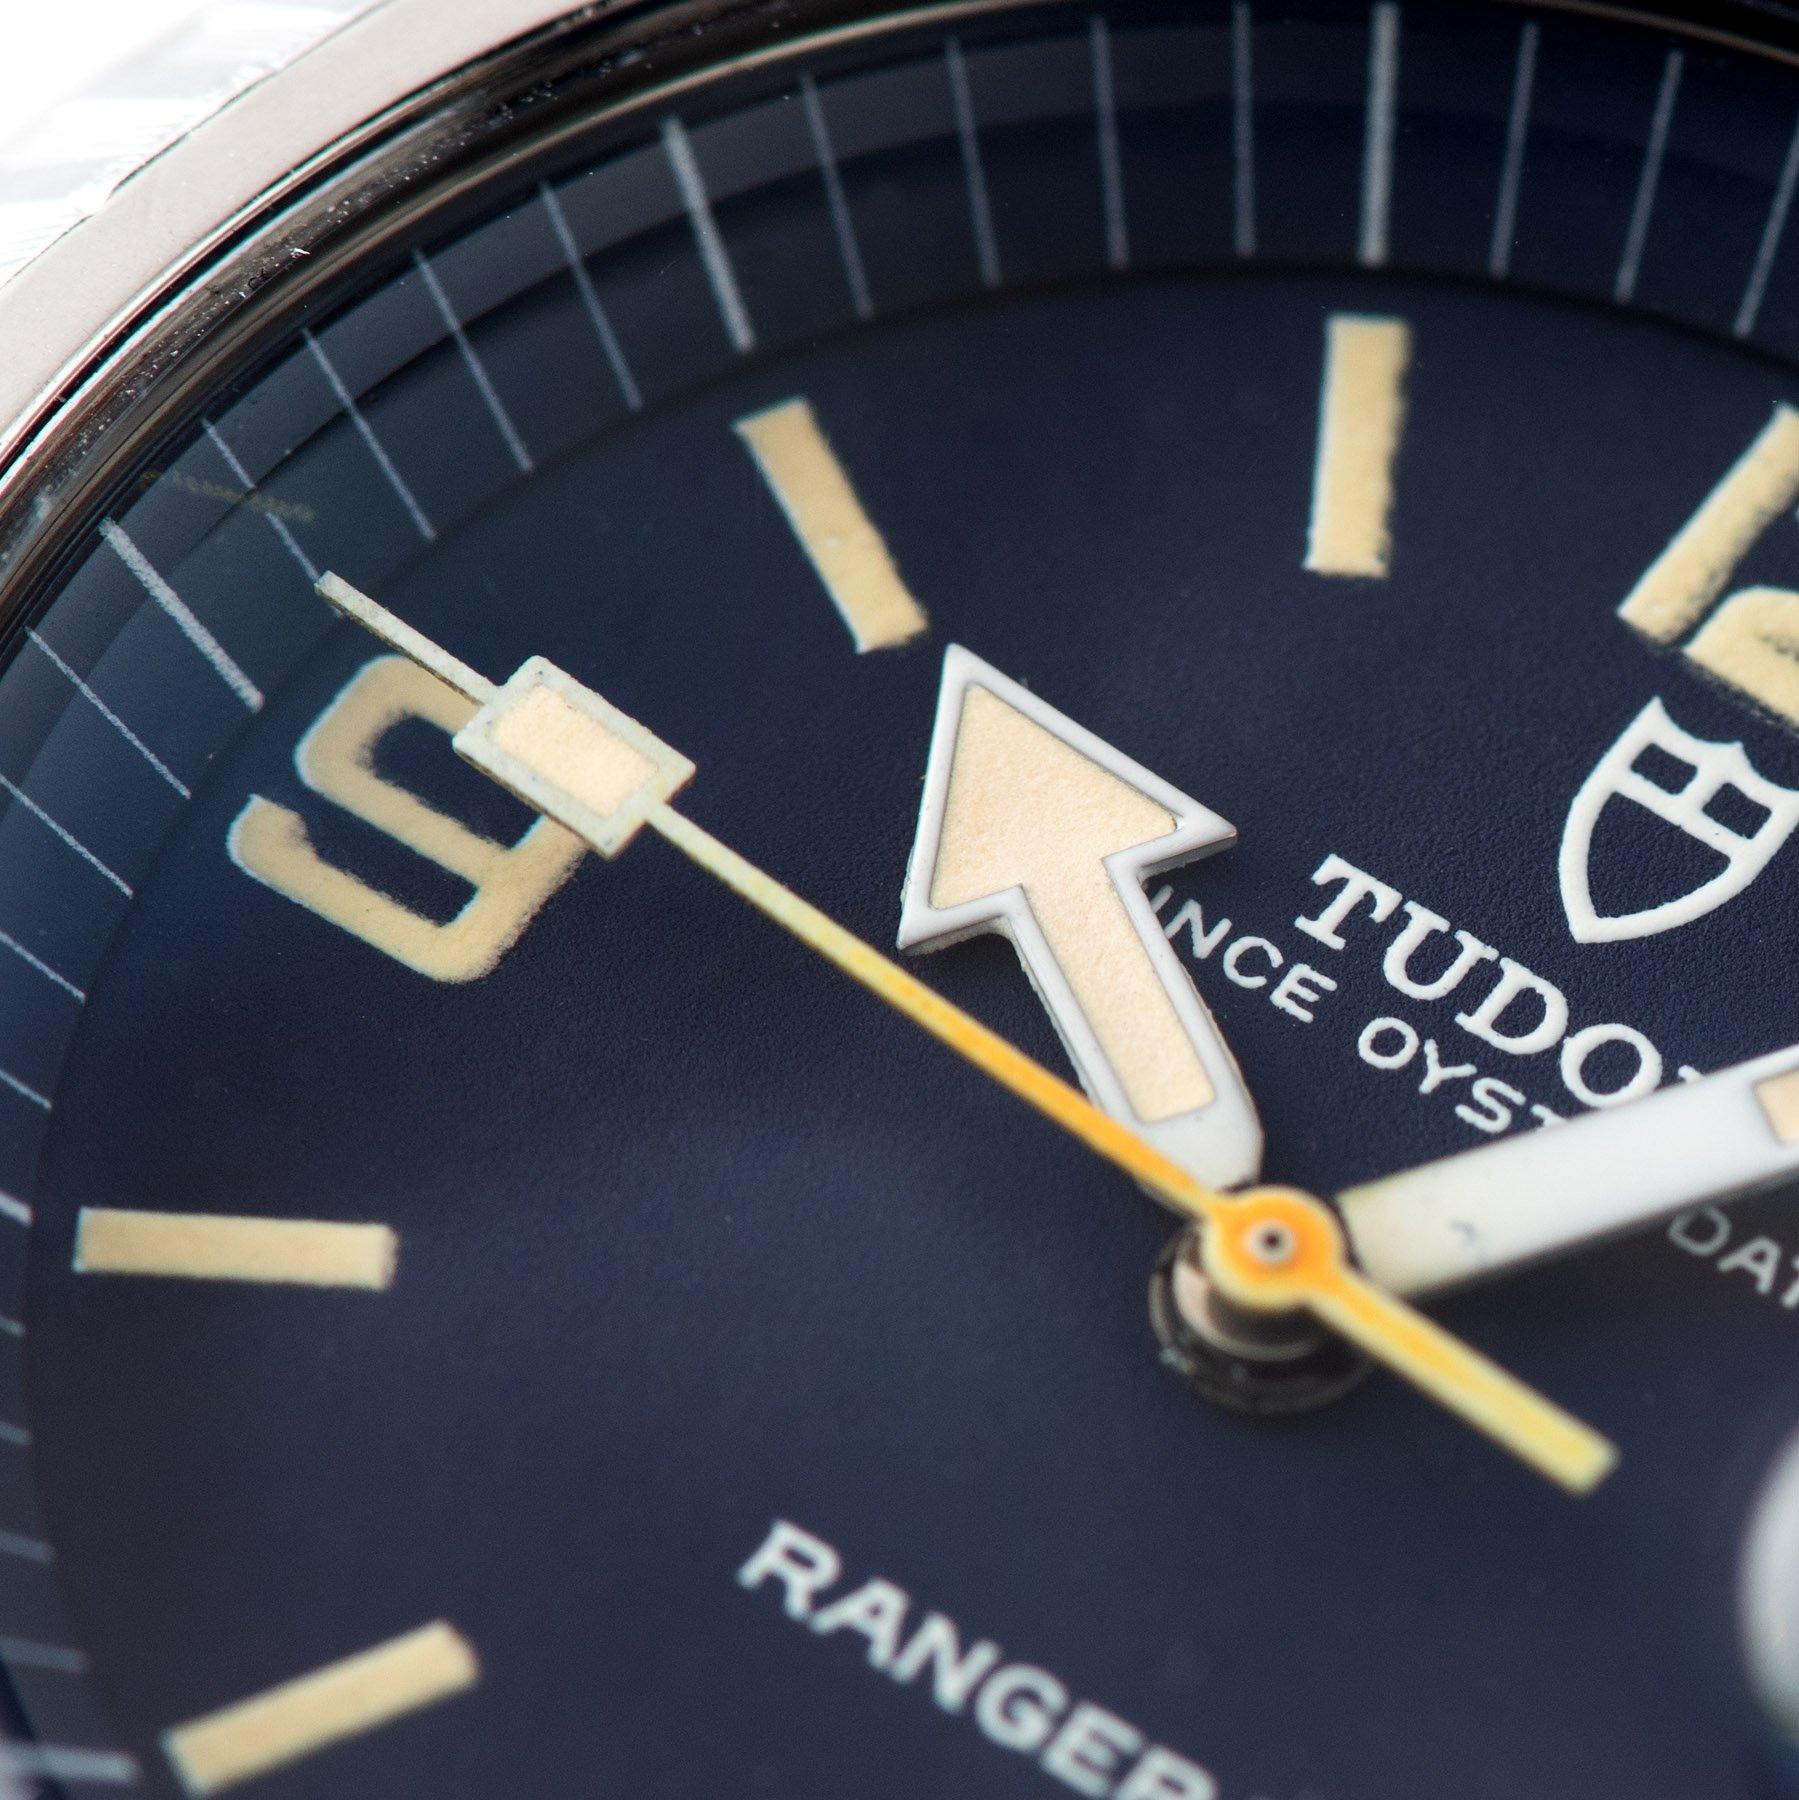 Tudor Ranger 2 Blue Dial Reference 9111/0 with a large arrow hour hand